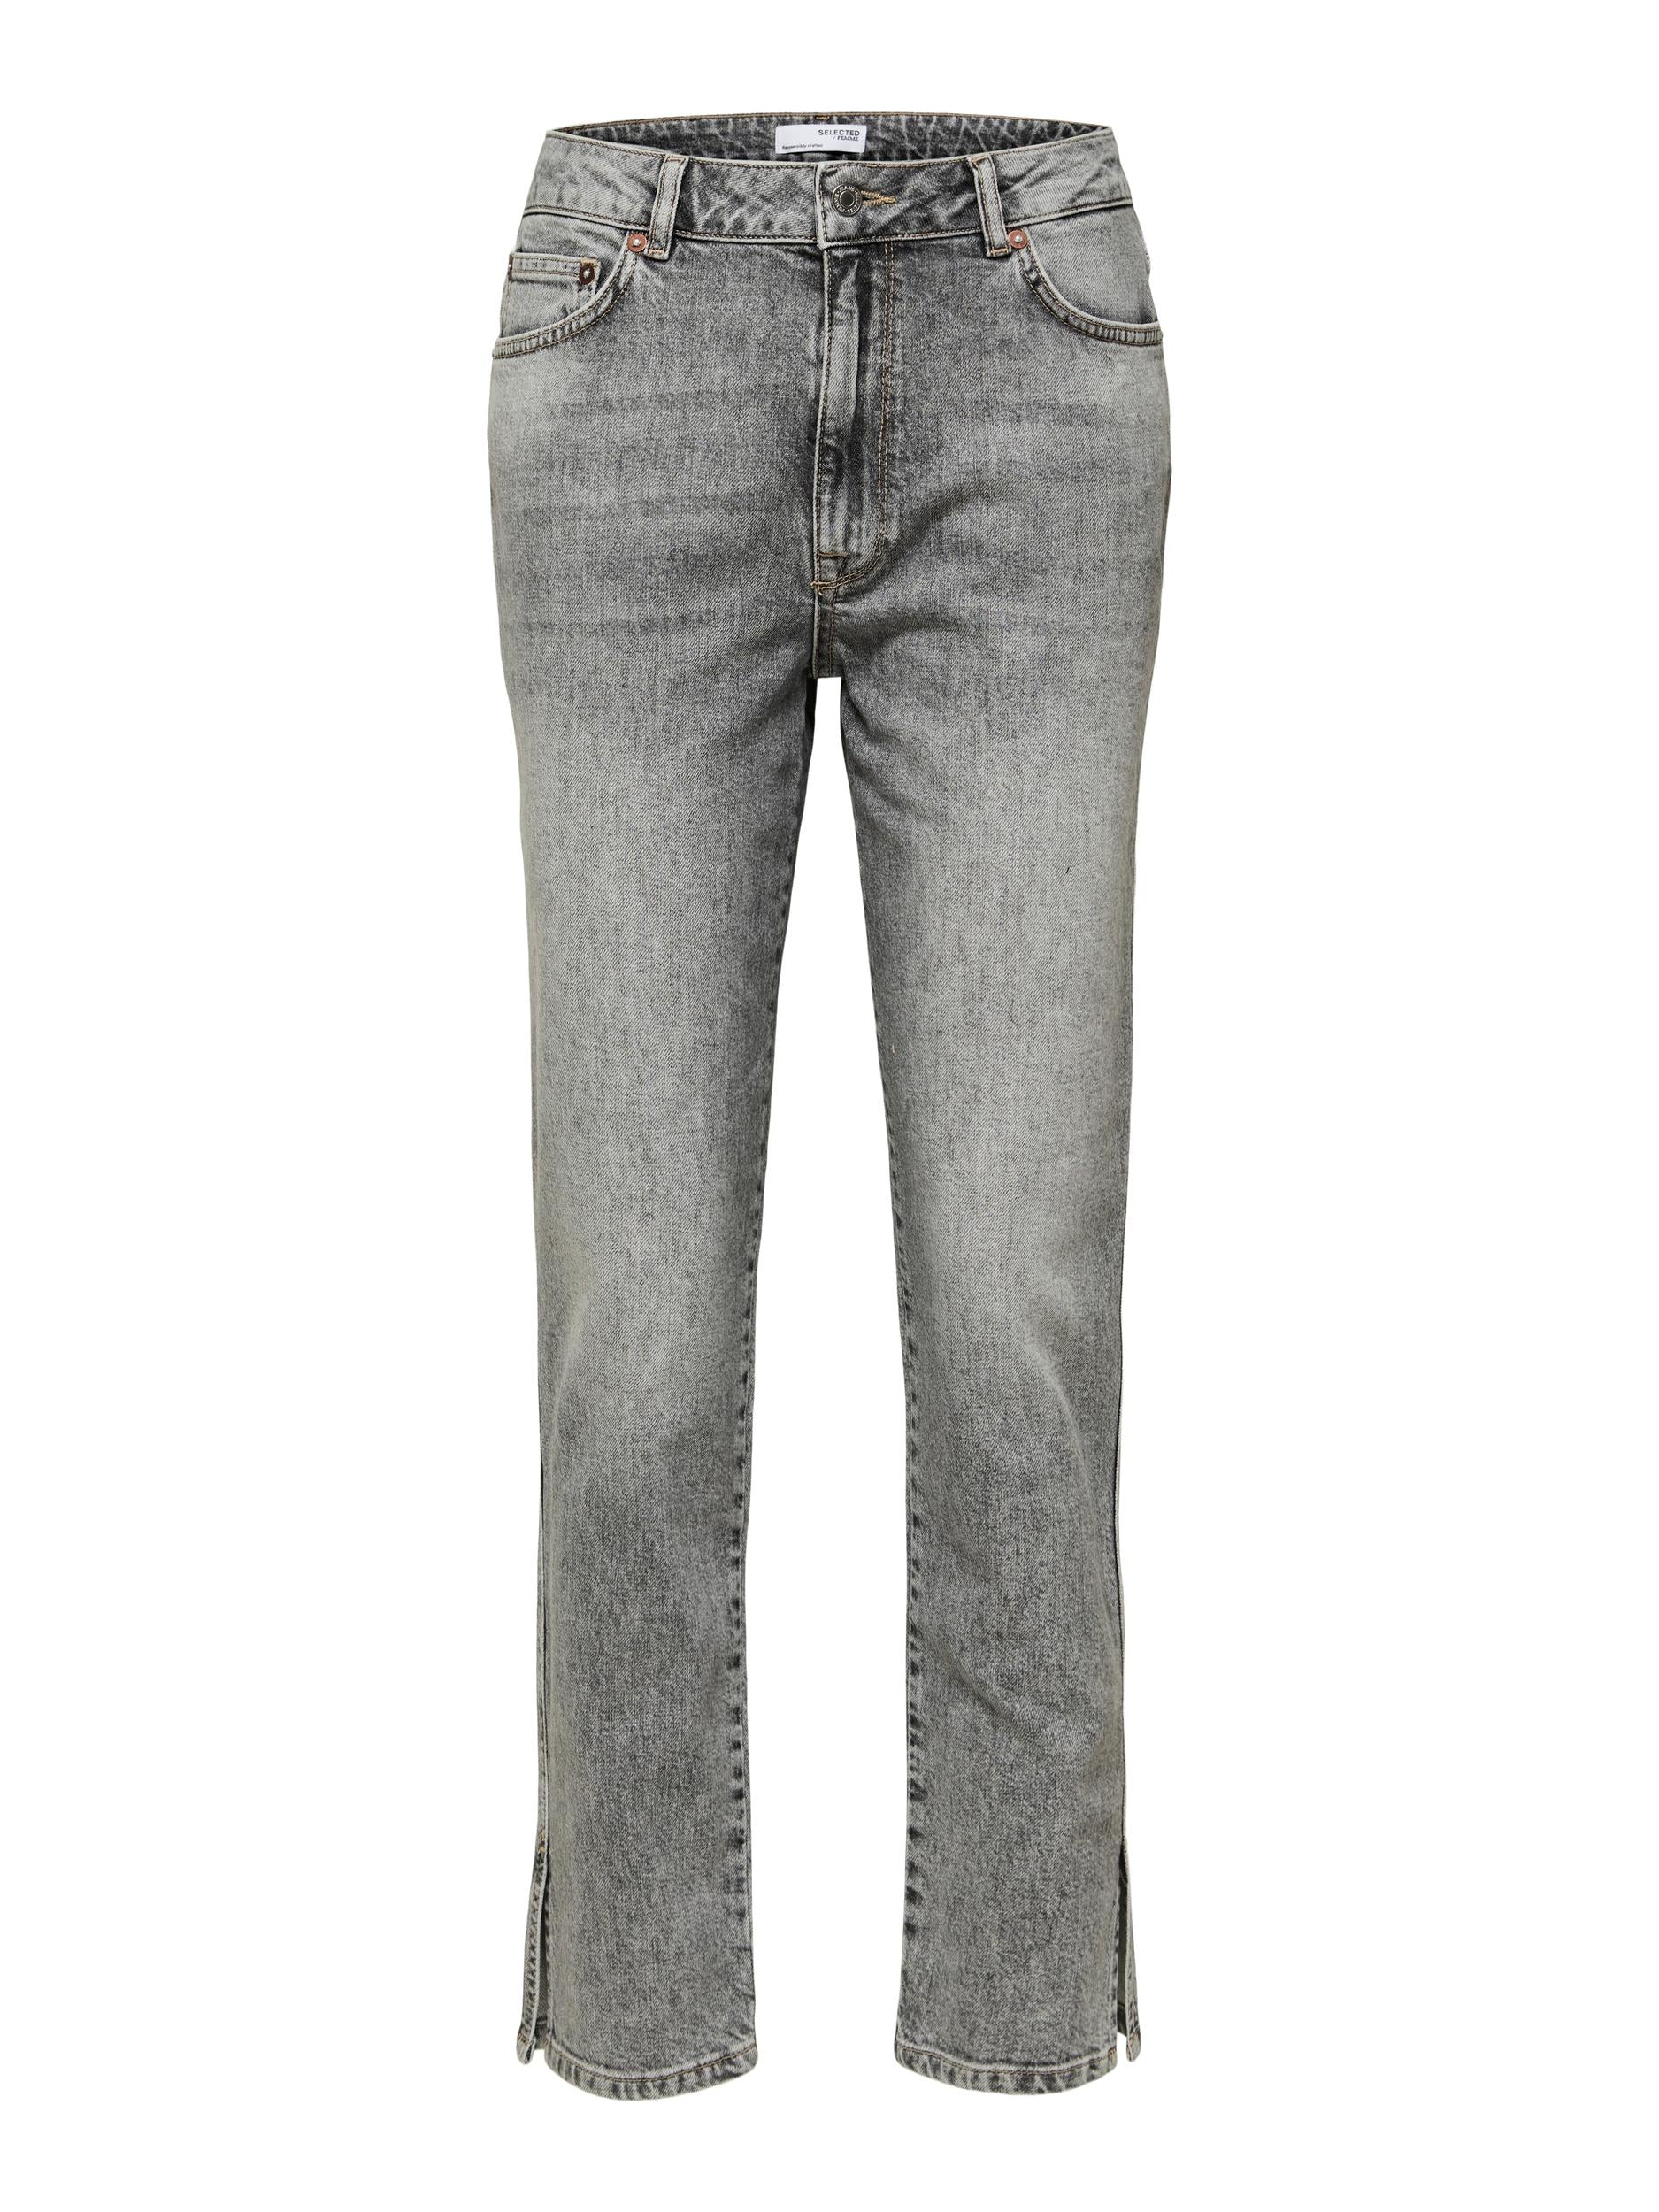 Selected Femme "Bea" Tapered Jeans